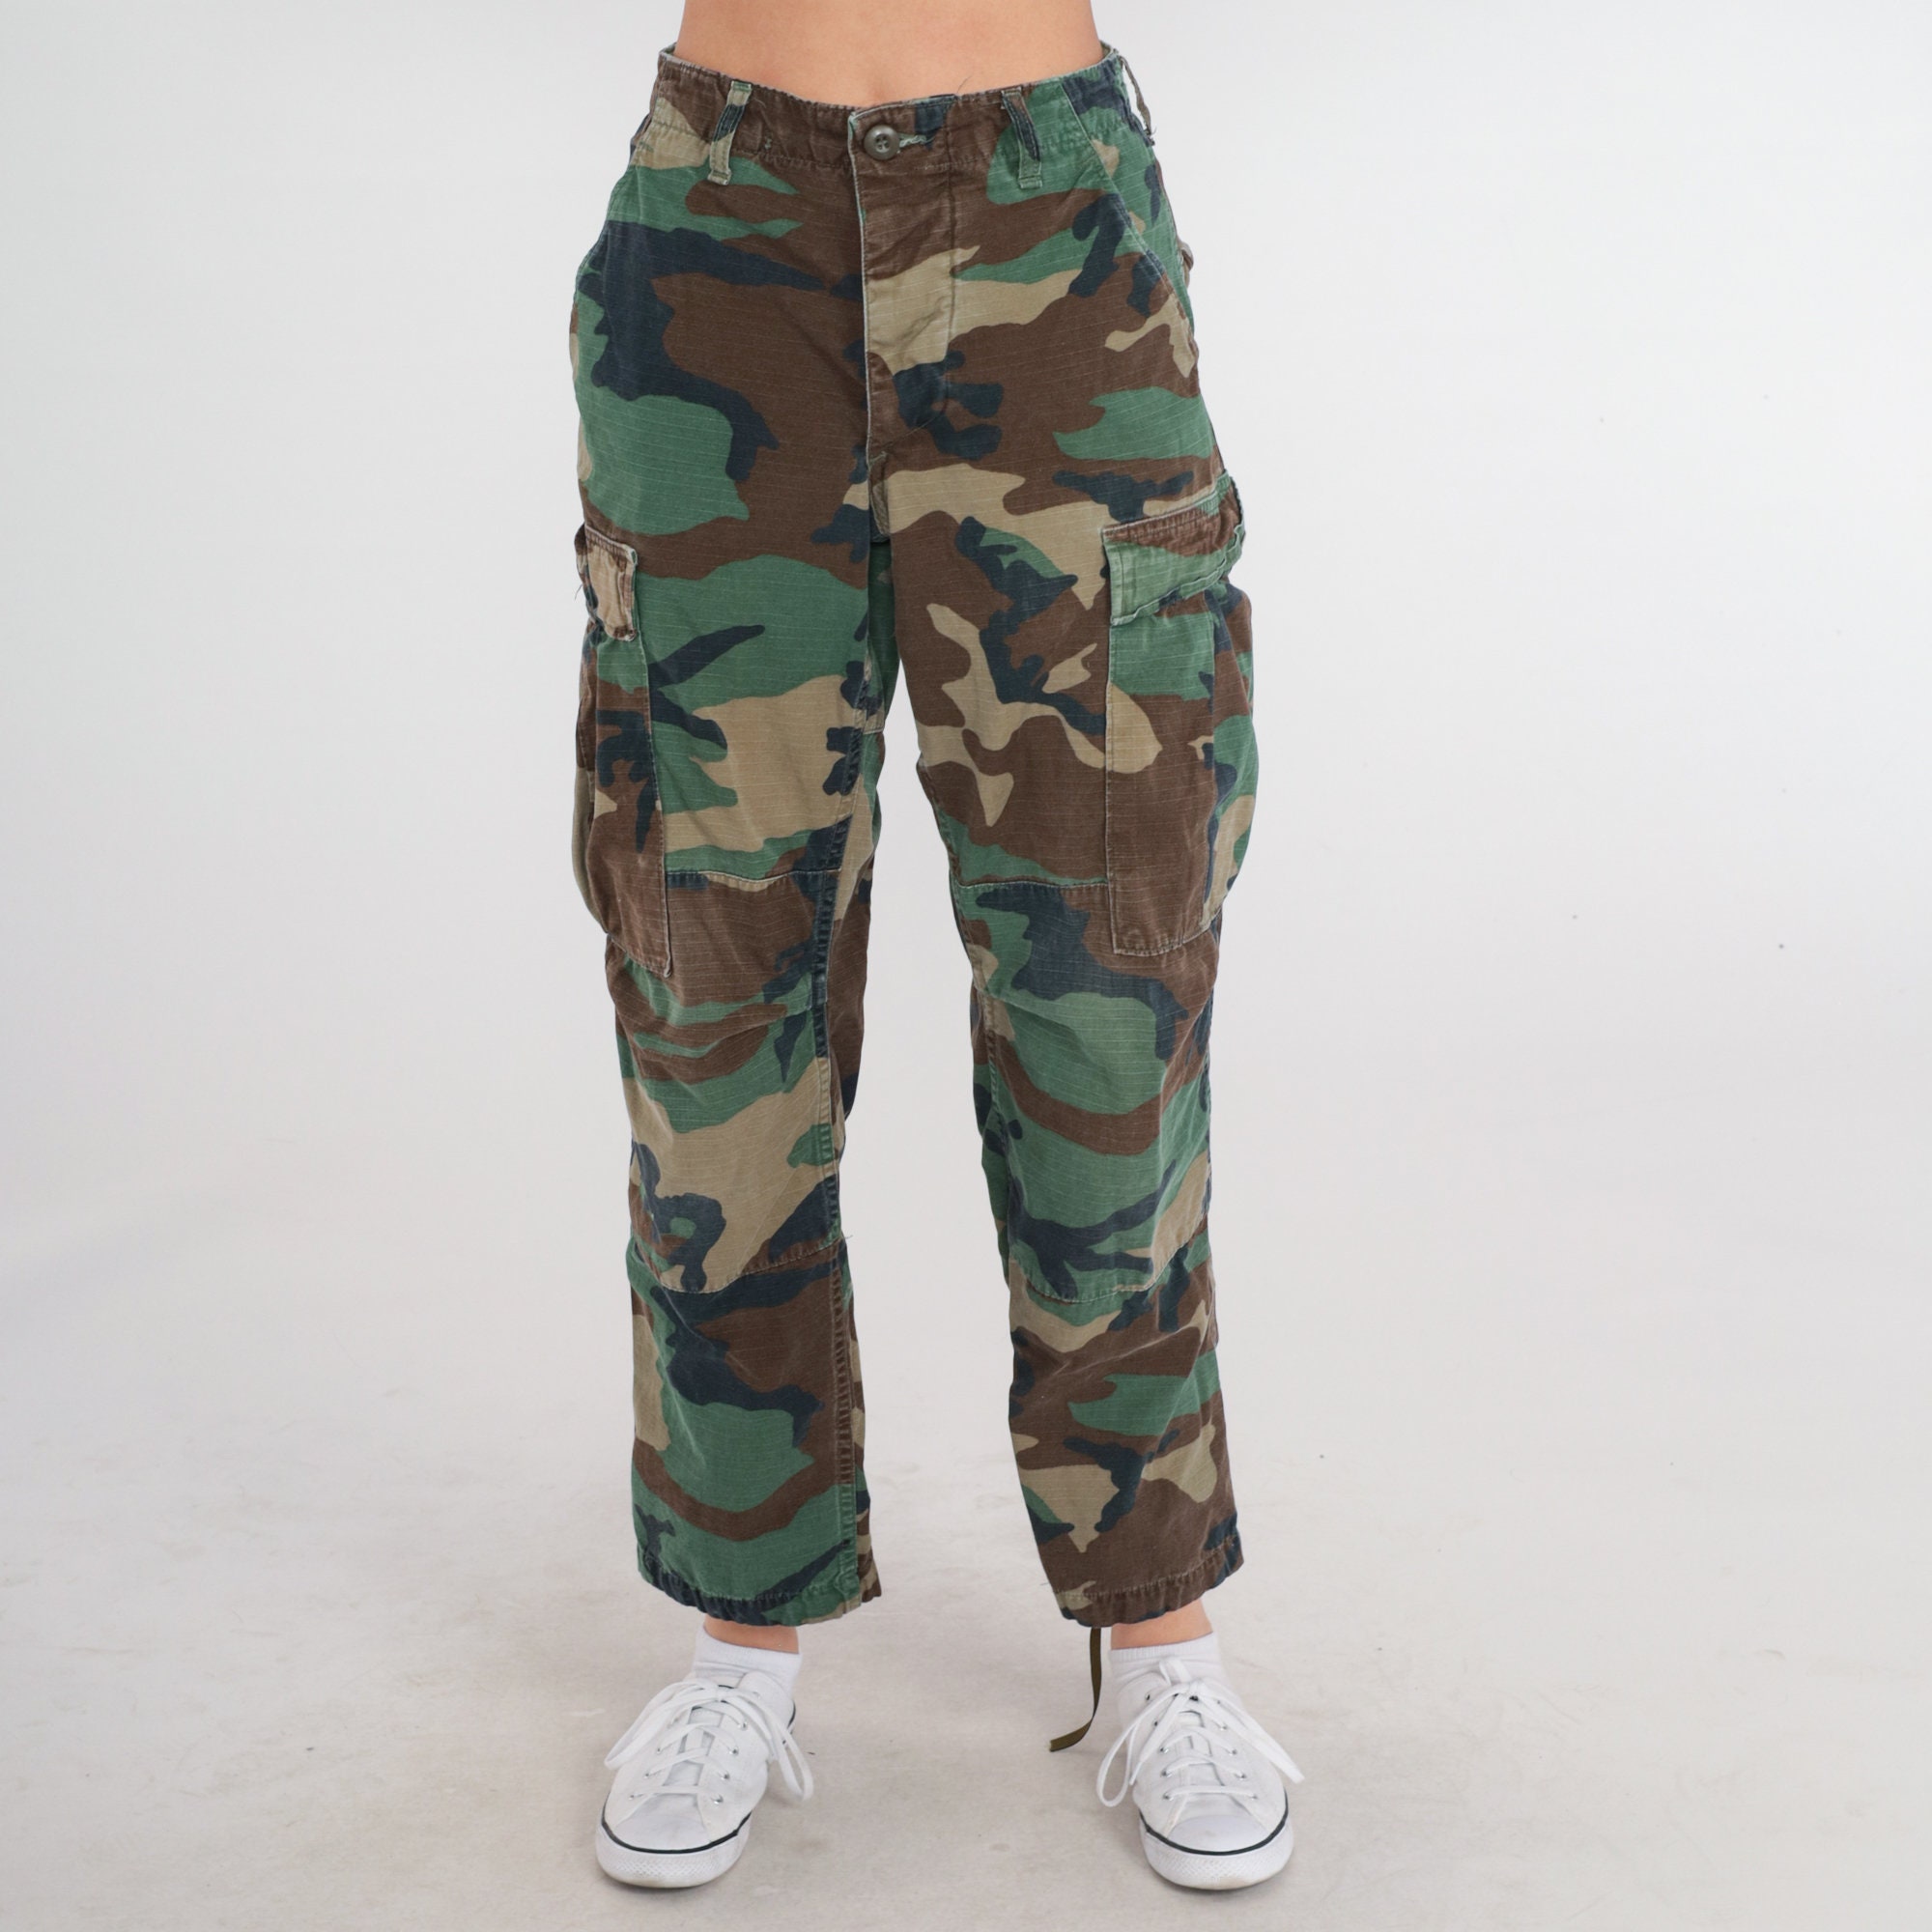 Camo Army Pants 90s Cargo Pants Military Combat Olive Green Camouflage ...